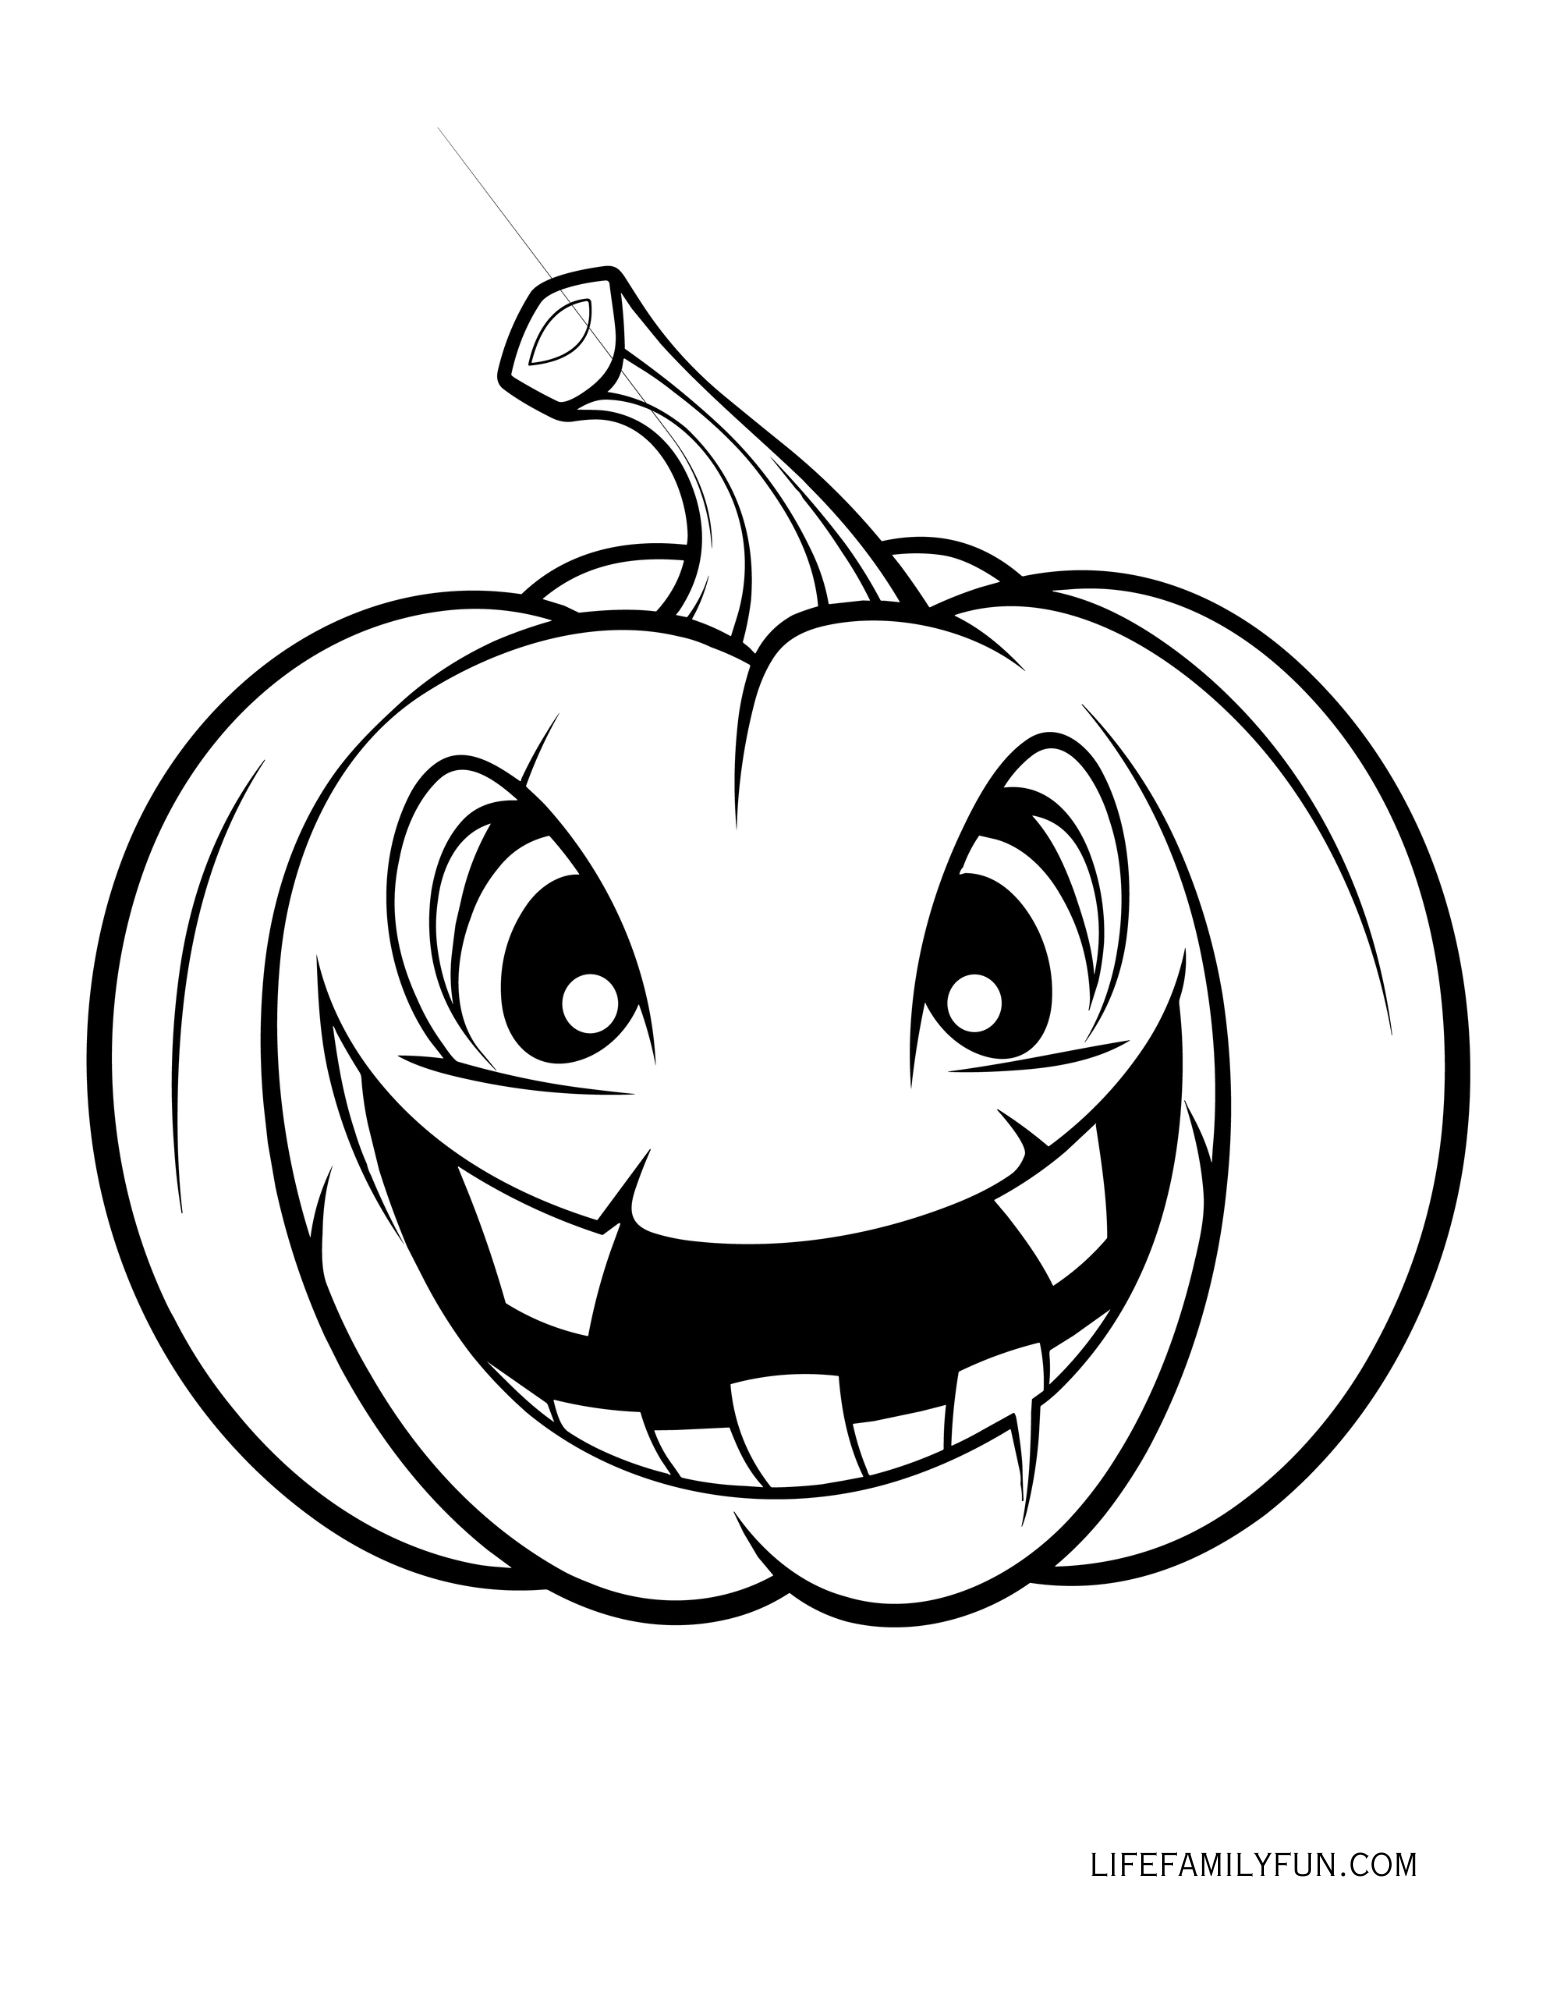 Funny Halloween Pumpkin Coloring Page